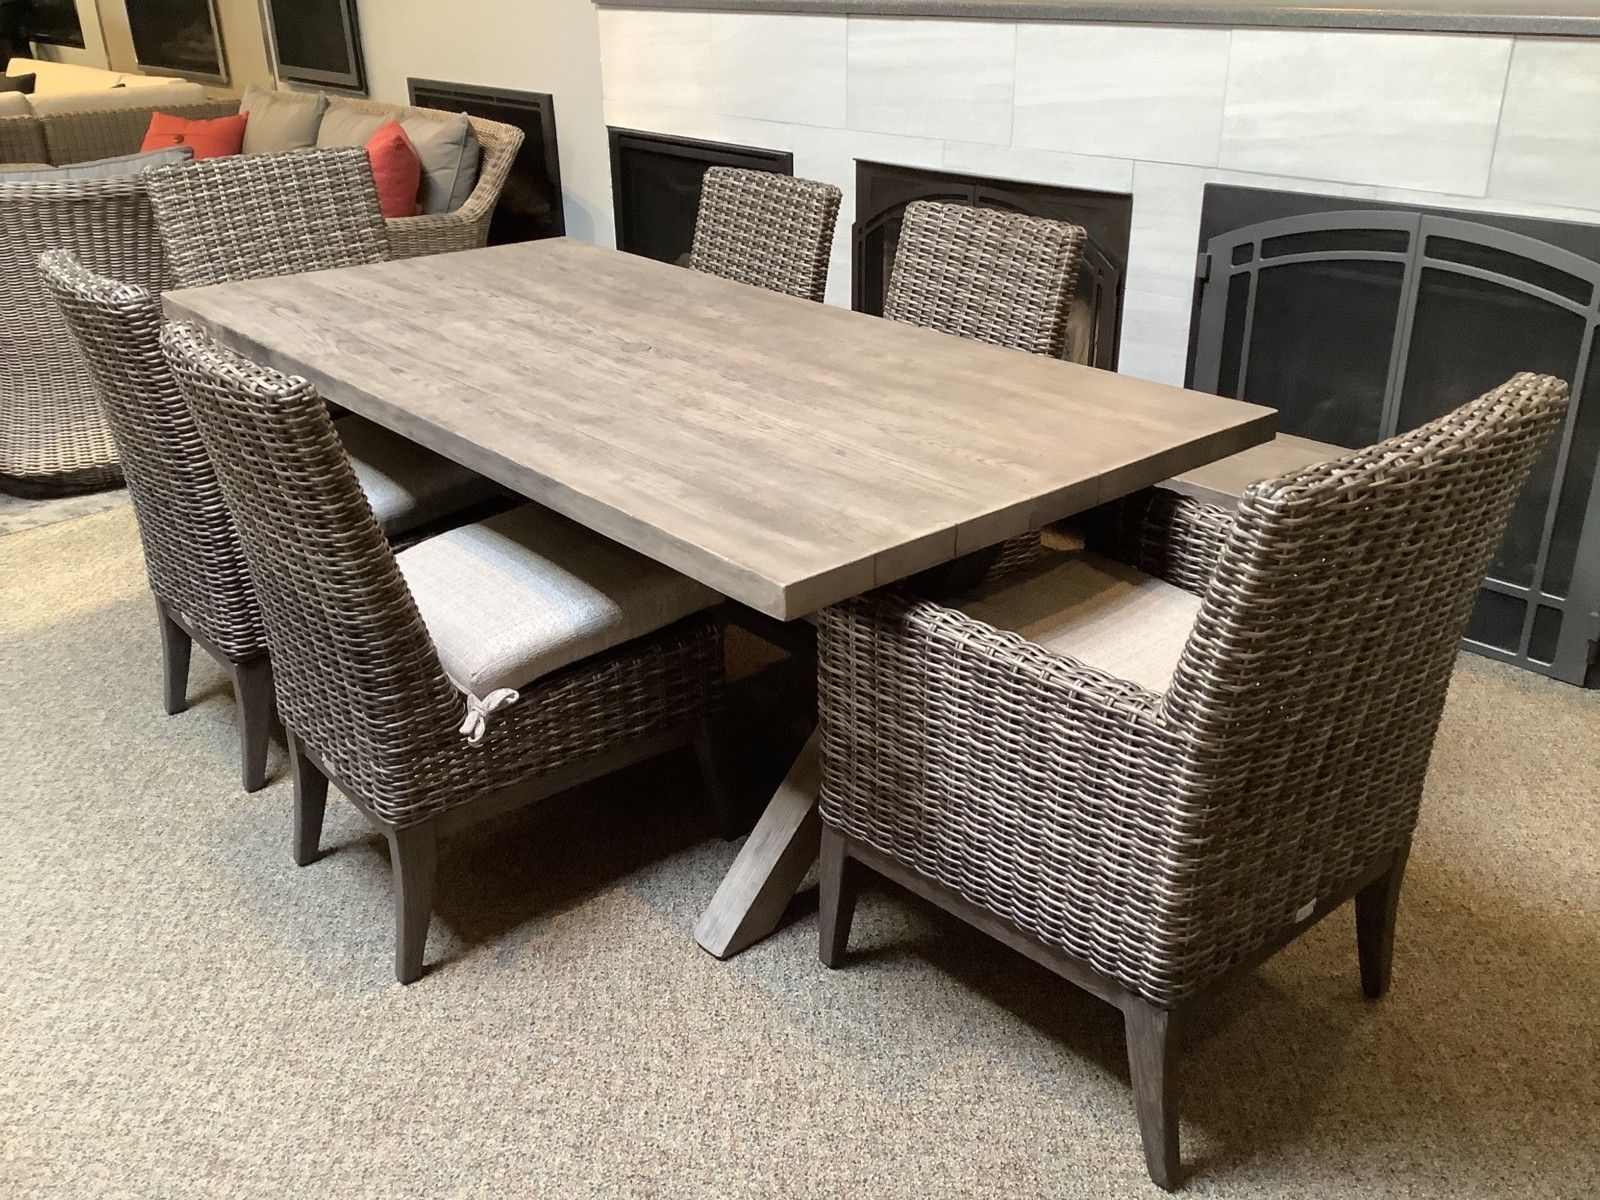 Distressed Gray Wicker Patio Dining Sets With Regard To Popular Outdoor Table And Chair Sets (View 1 of 15)